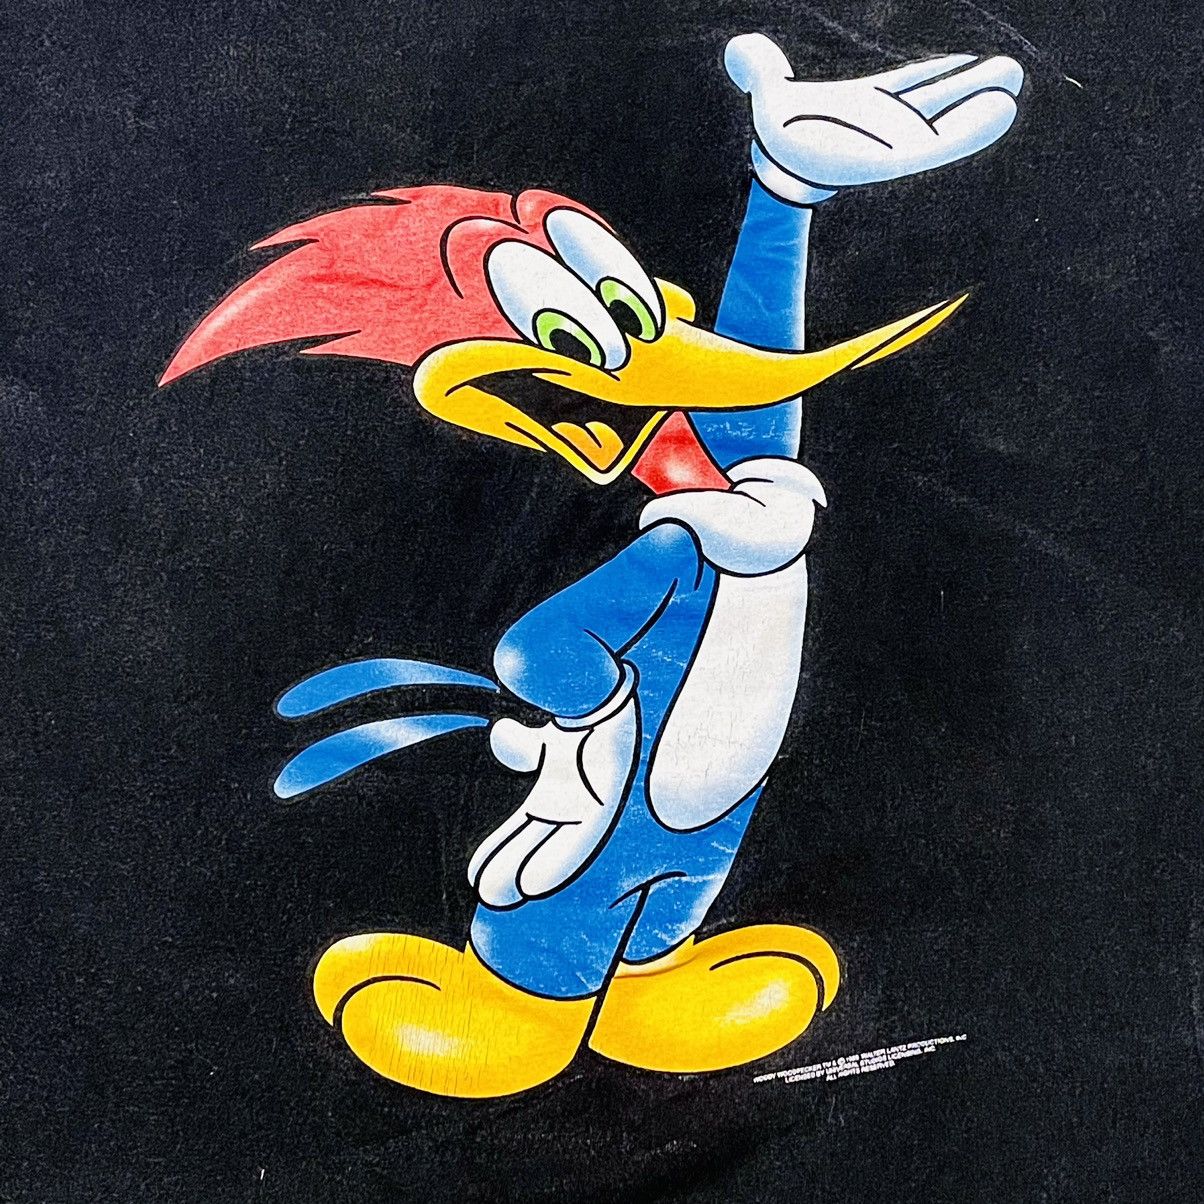 Vintage 1998 WOODY THE WOODPECKER TEE! Size US XL / EU 56 / 4 - 1 Preview